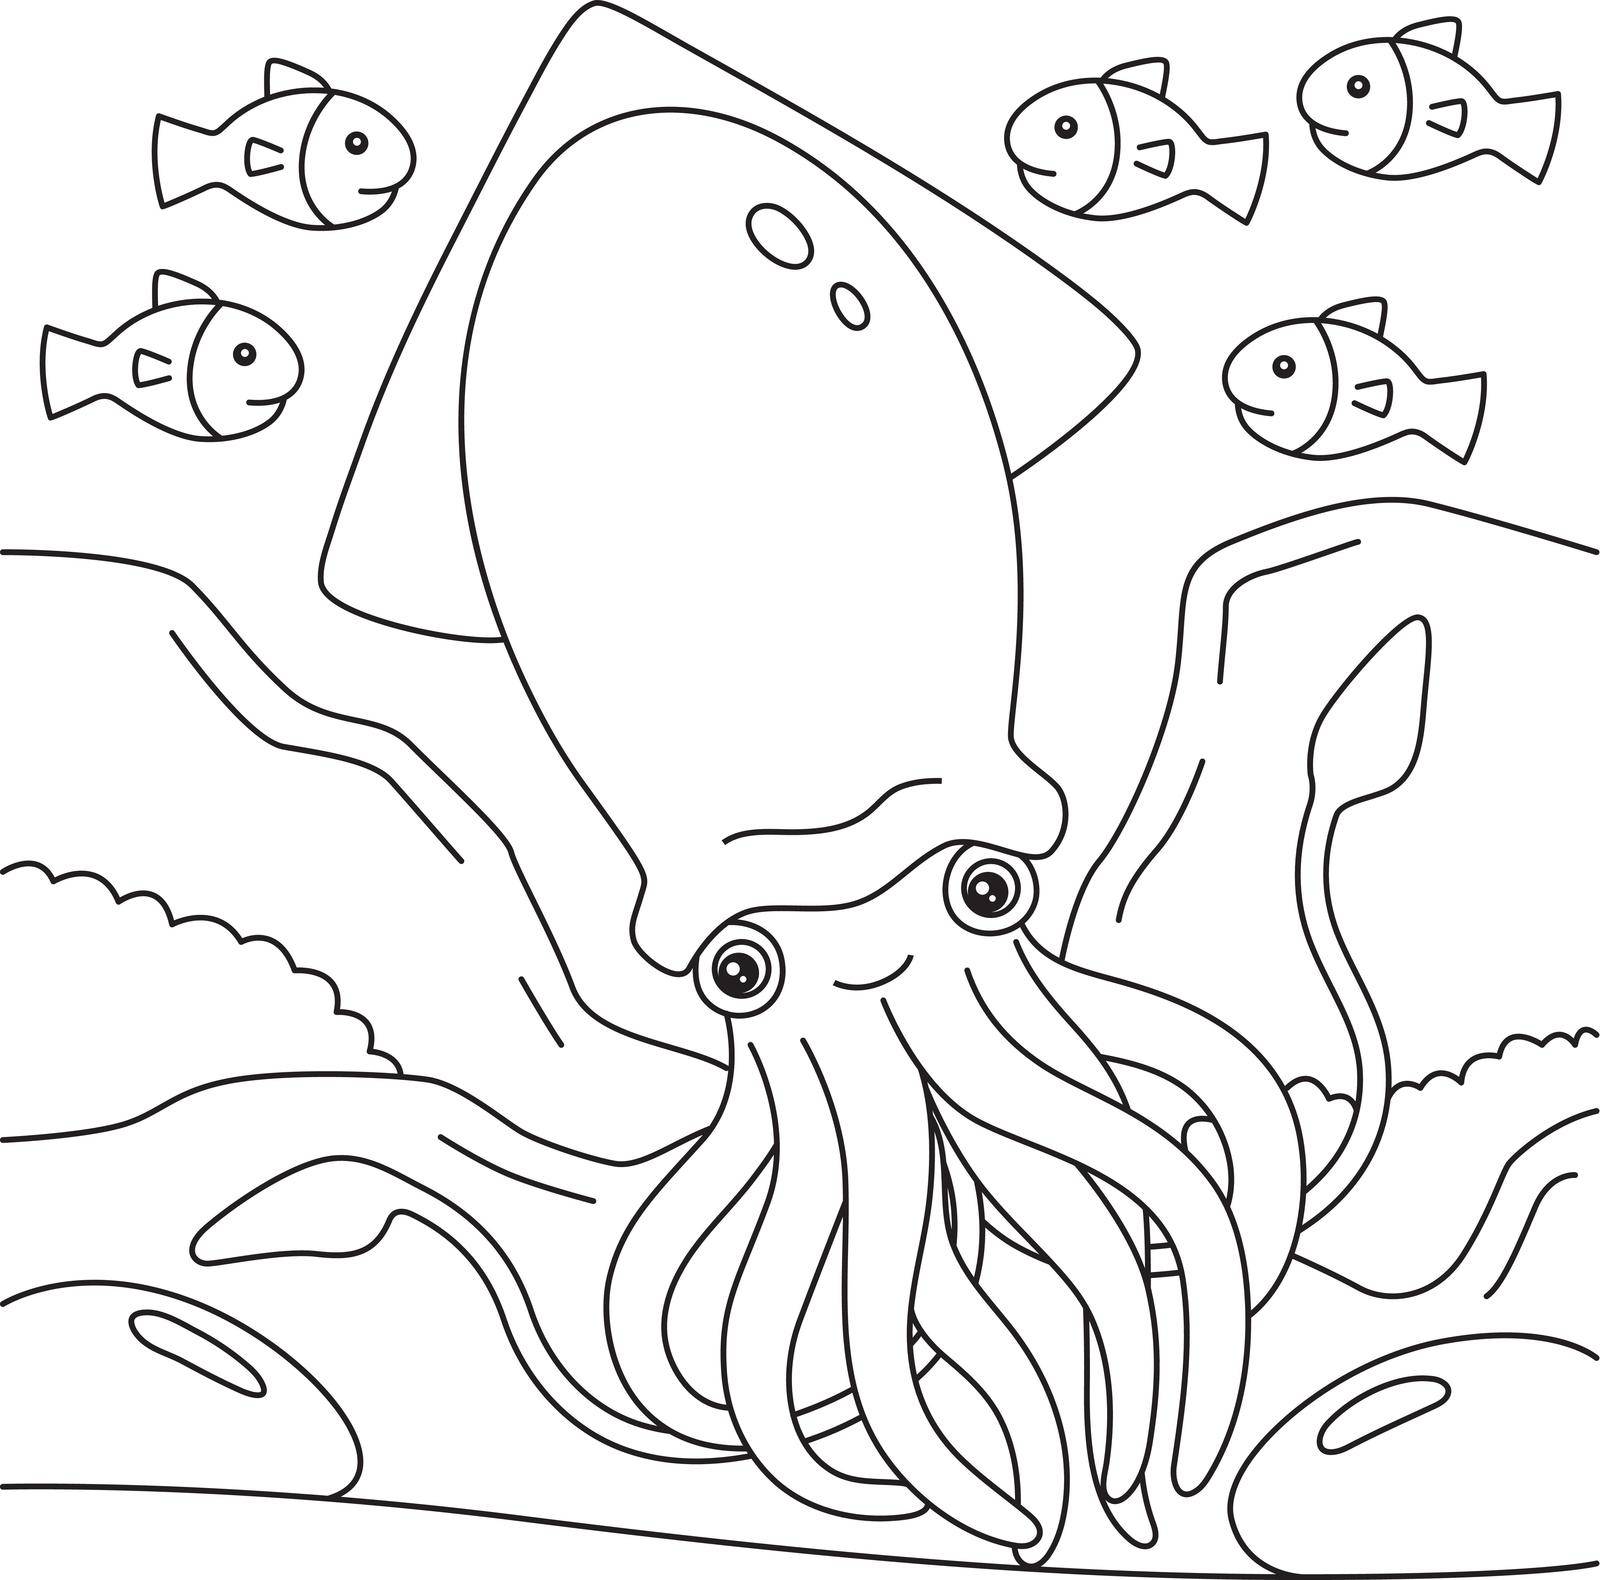 A cute and funny coloring page a giant squid. Provides hours of coloring fun for children. To color, this page is very easy. Suitable for little kids and toddlers.